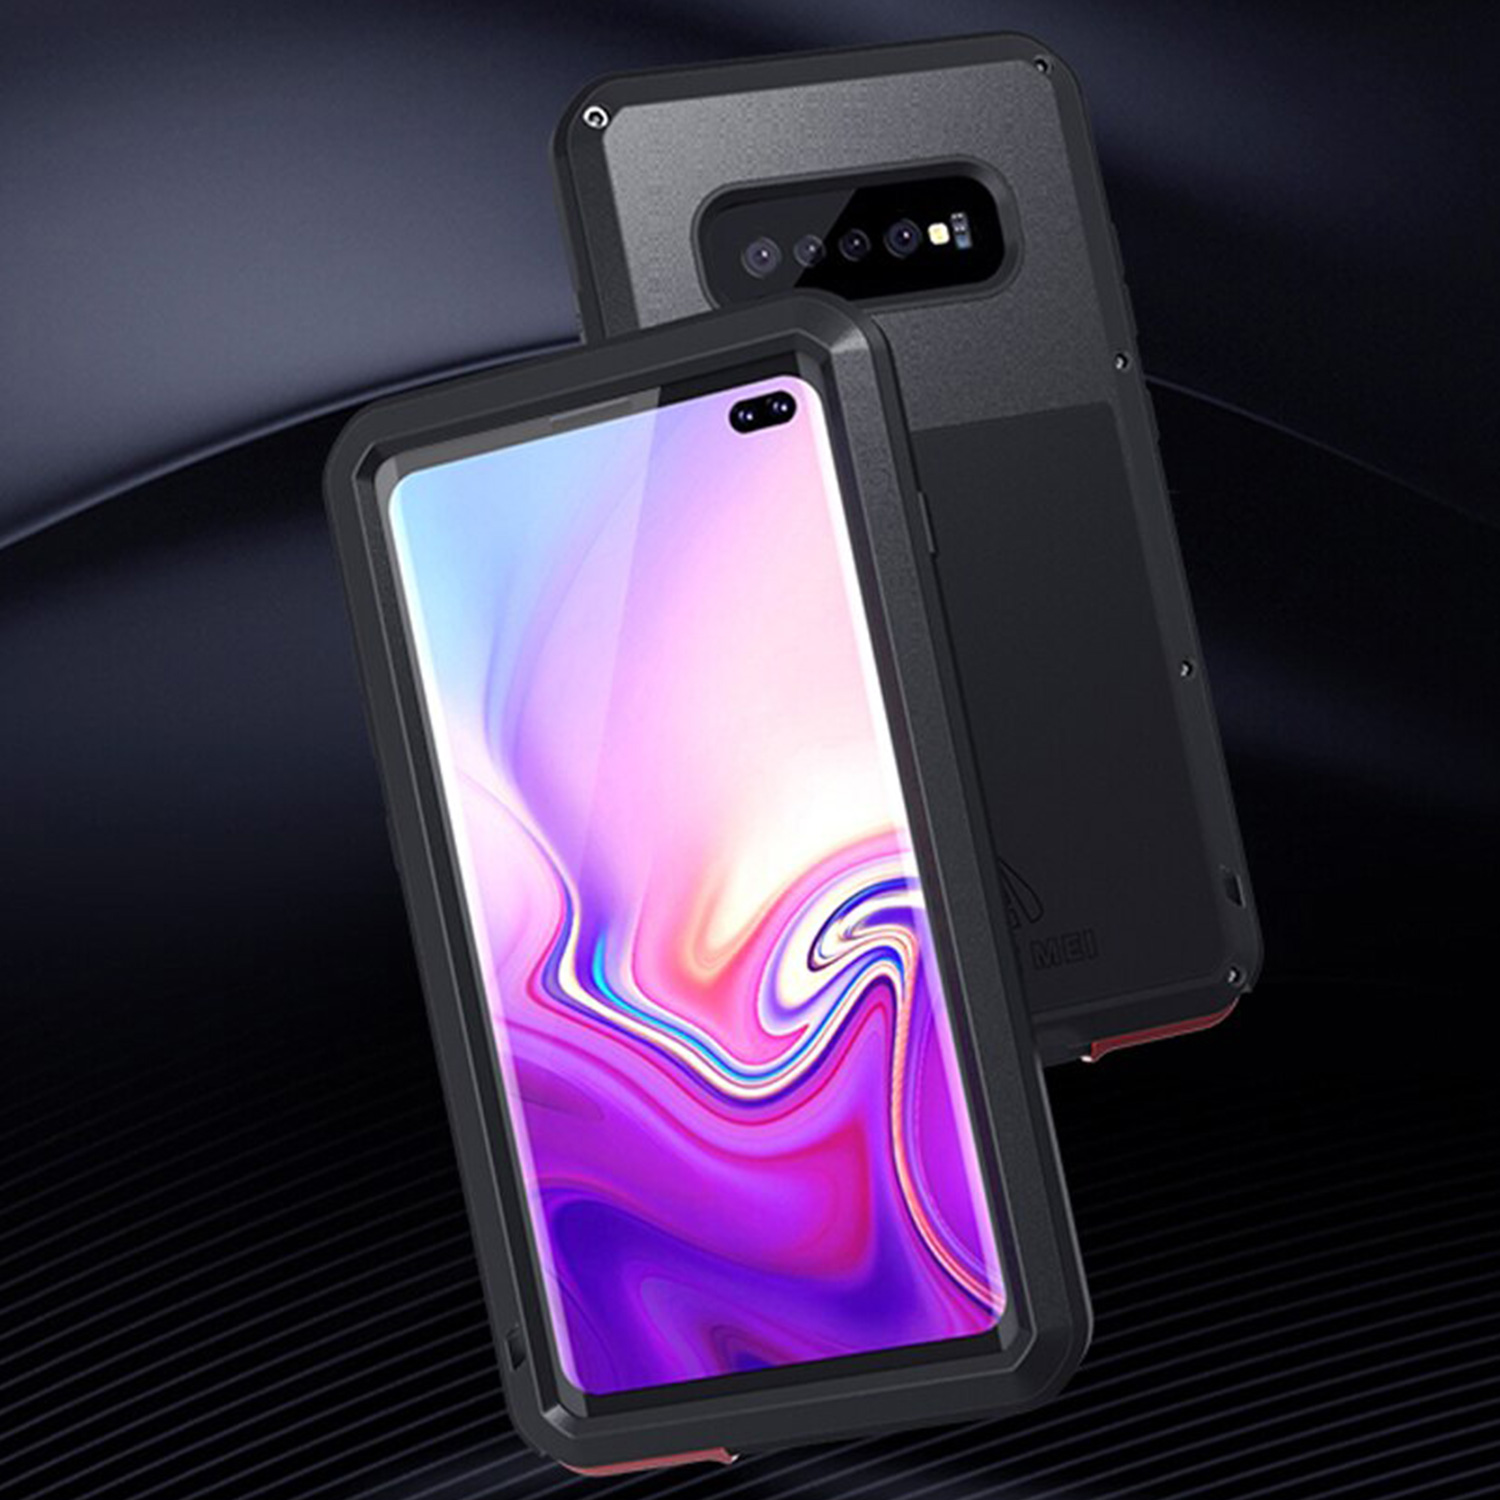 Love Mei case for Samsung Galaxy S10 Plus - Camera lens protection